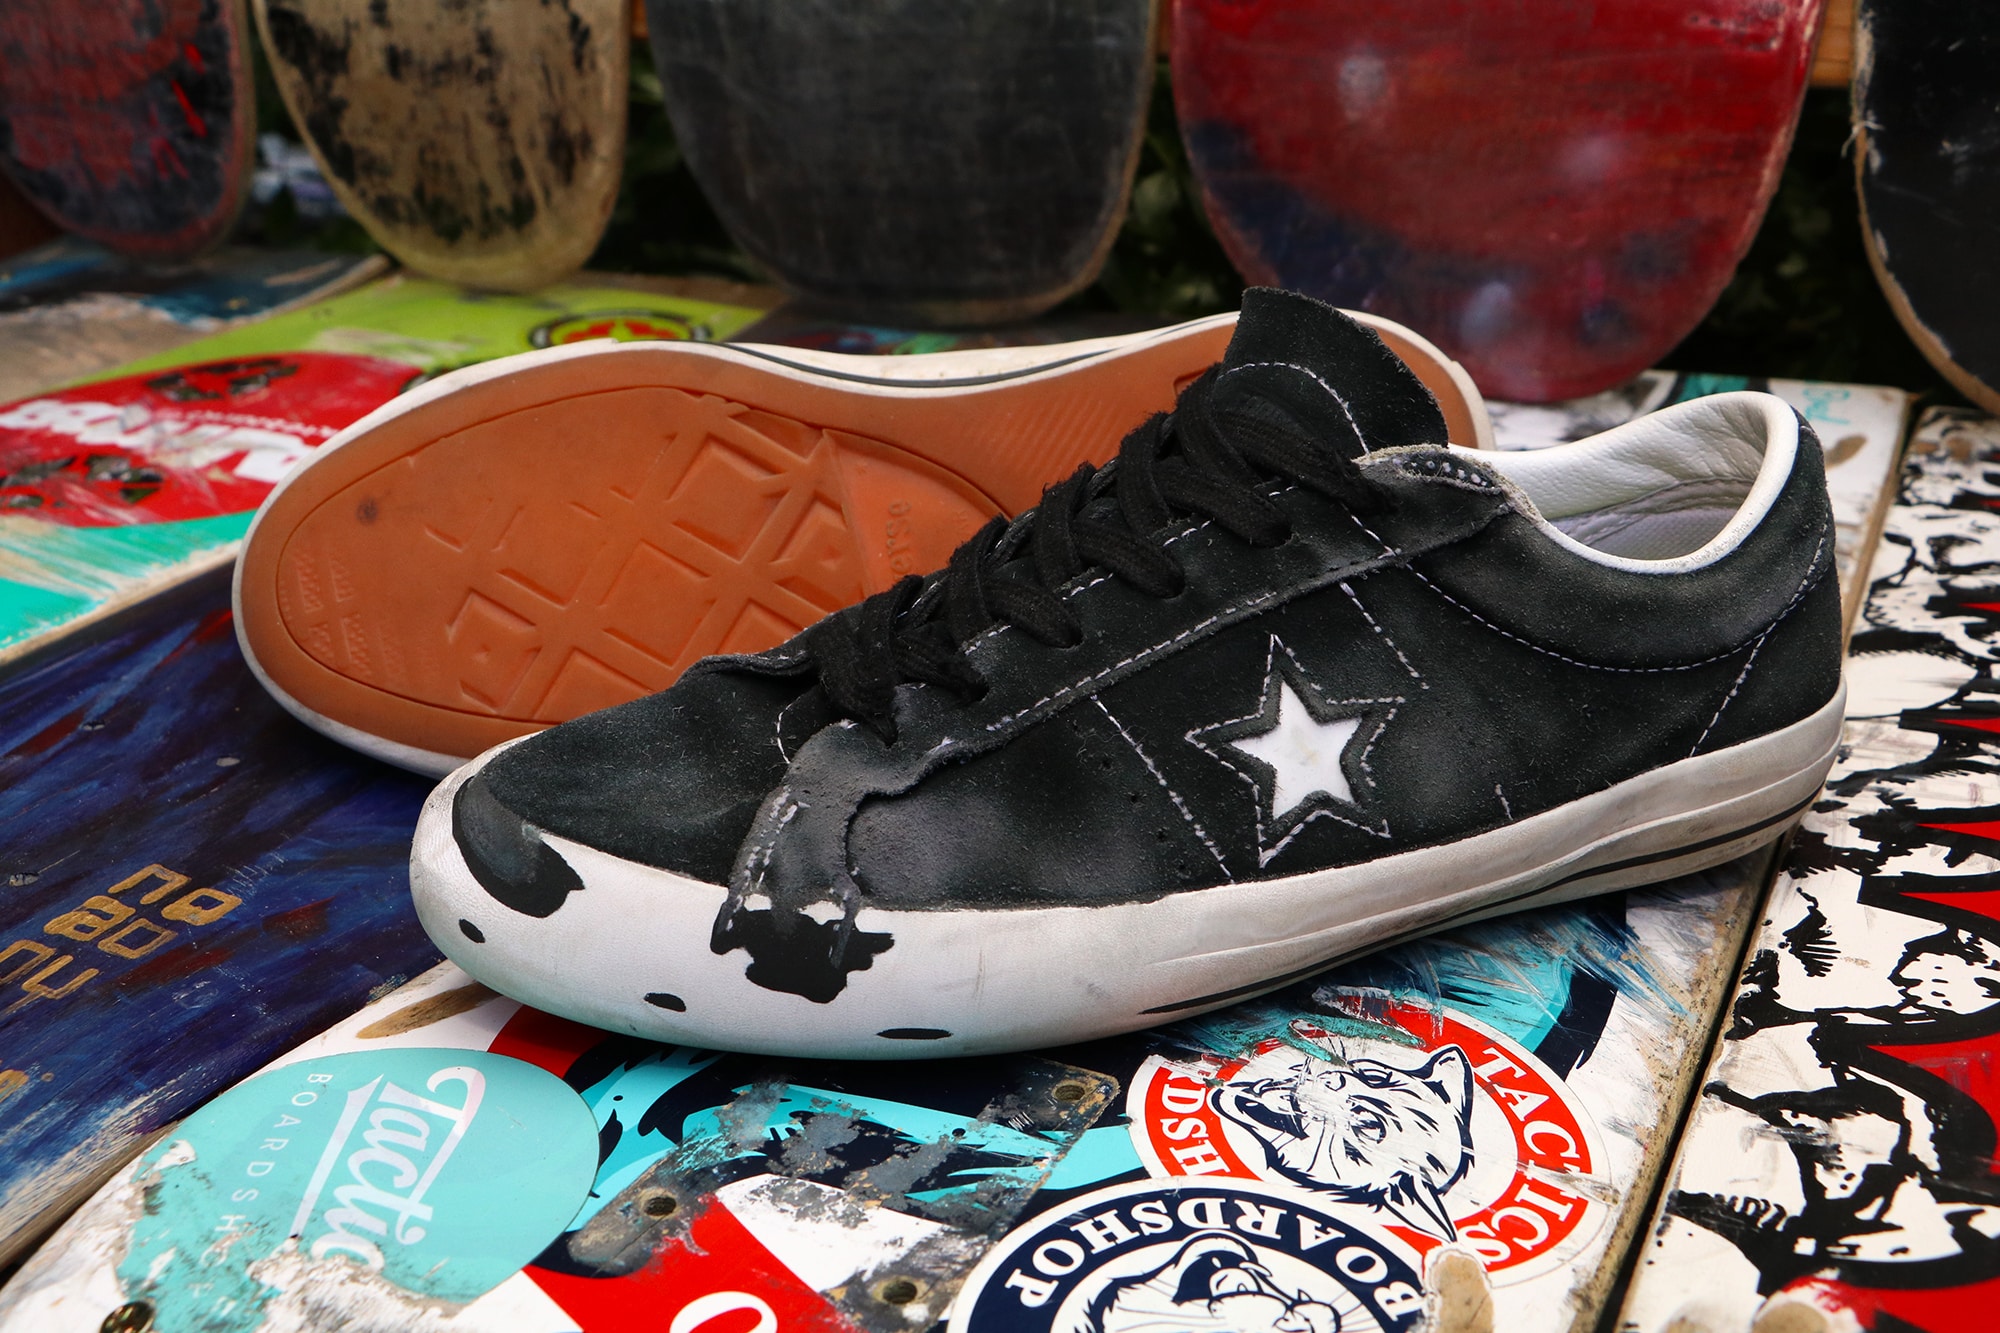 converse one star pro skate shoes